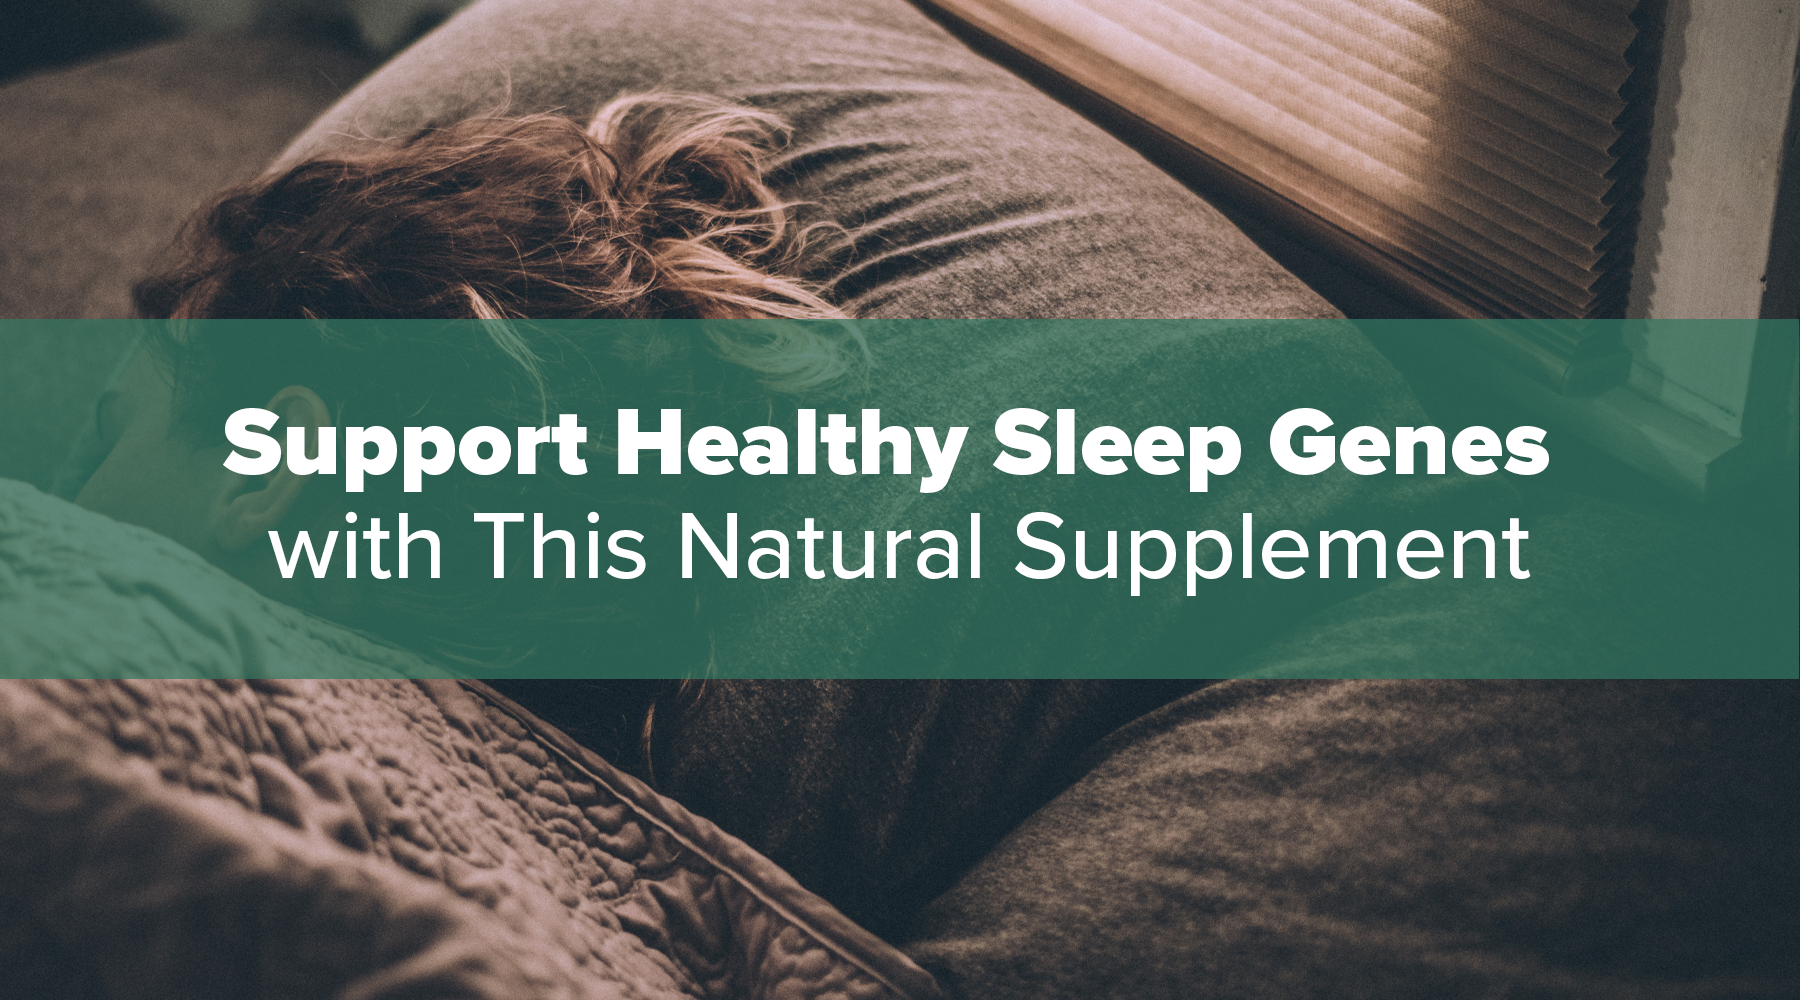 Support Healthy Sleep Genes with This Natural Supplement